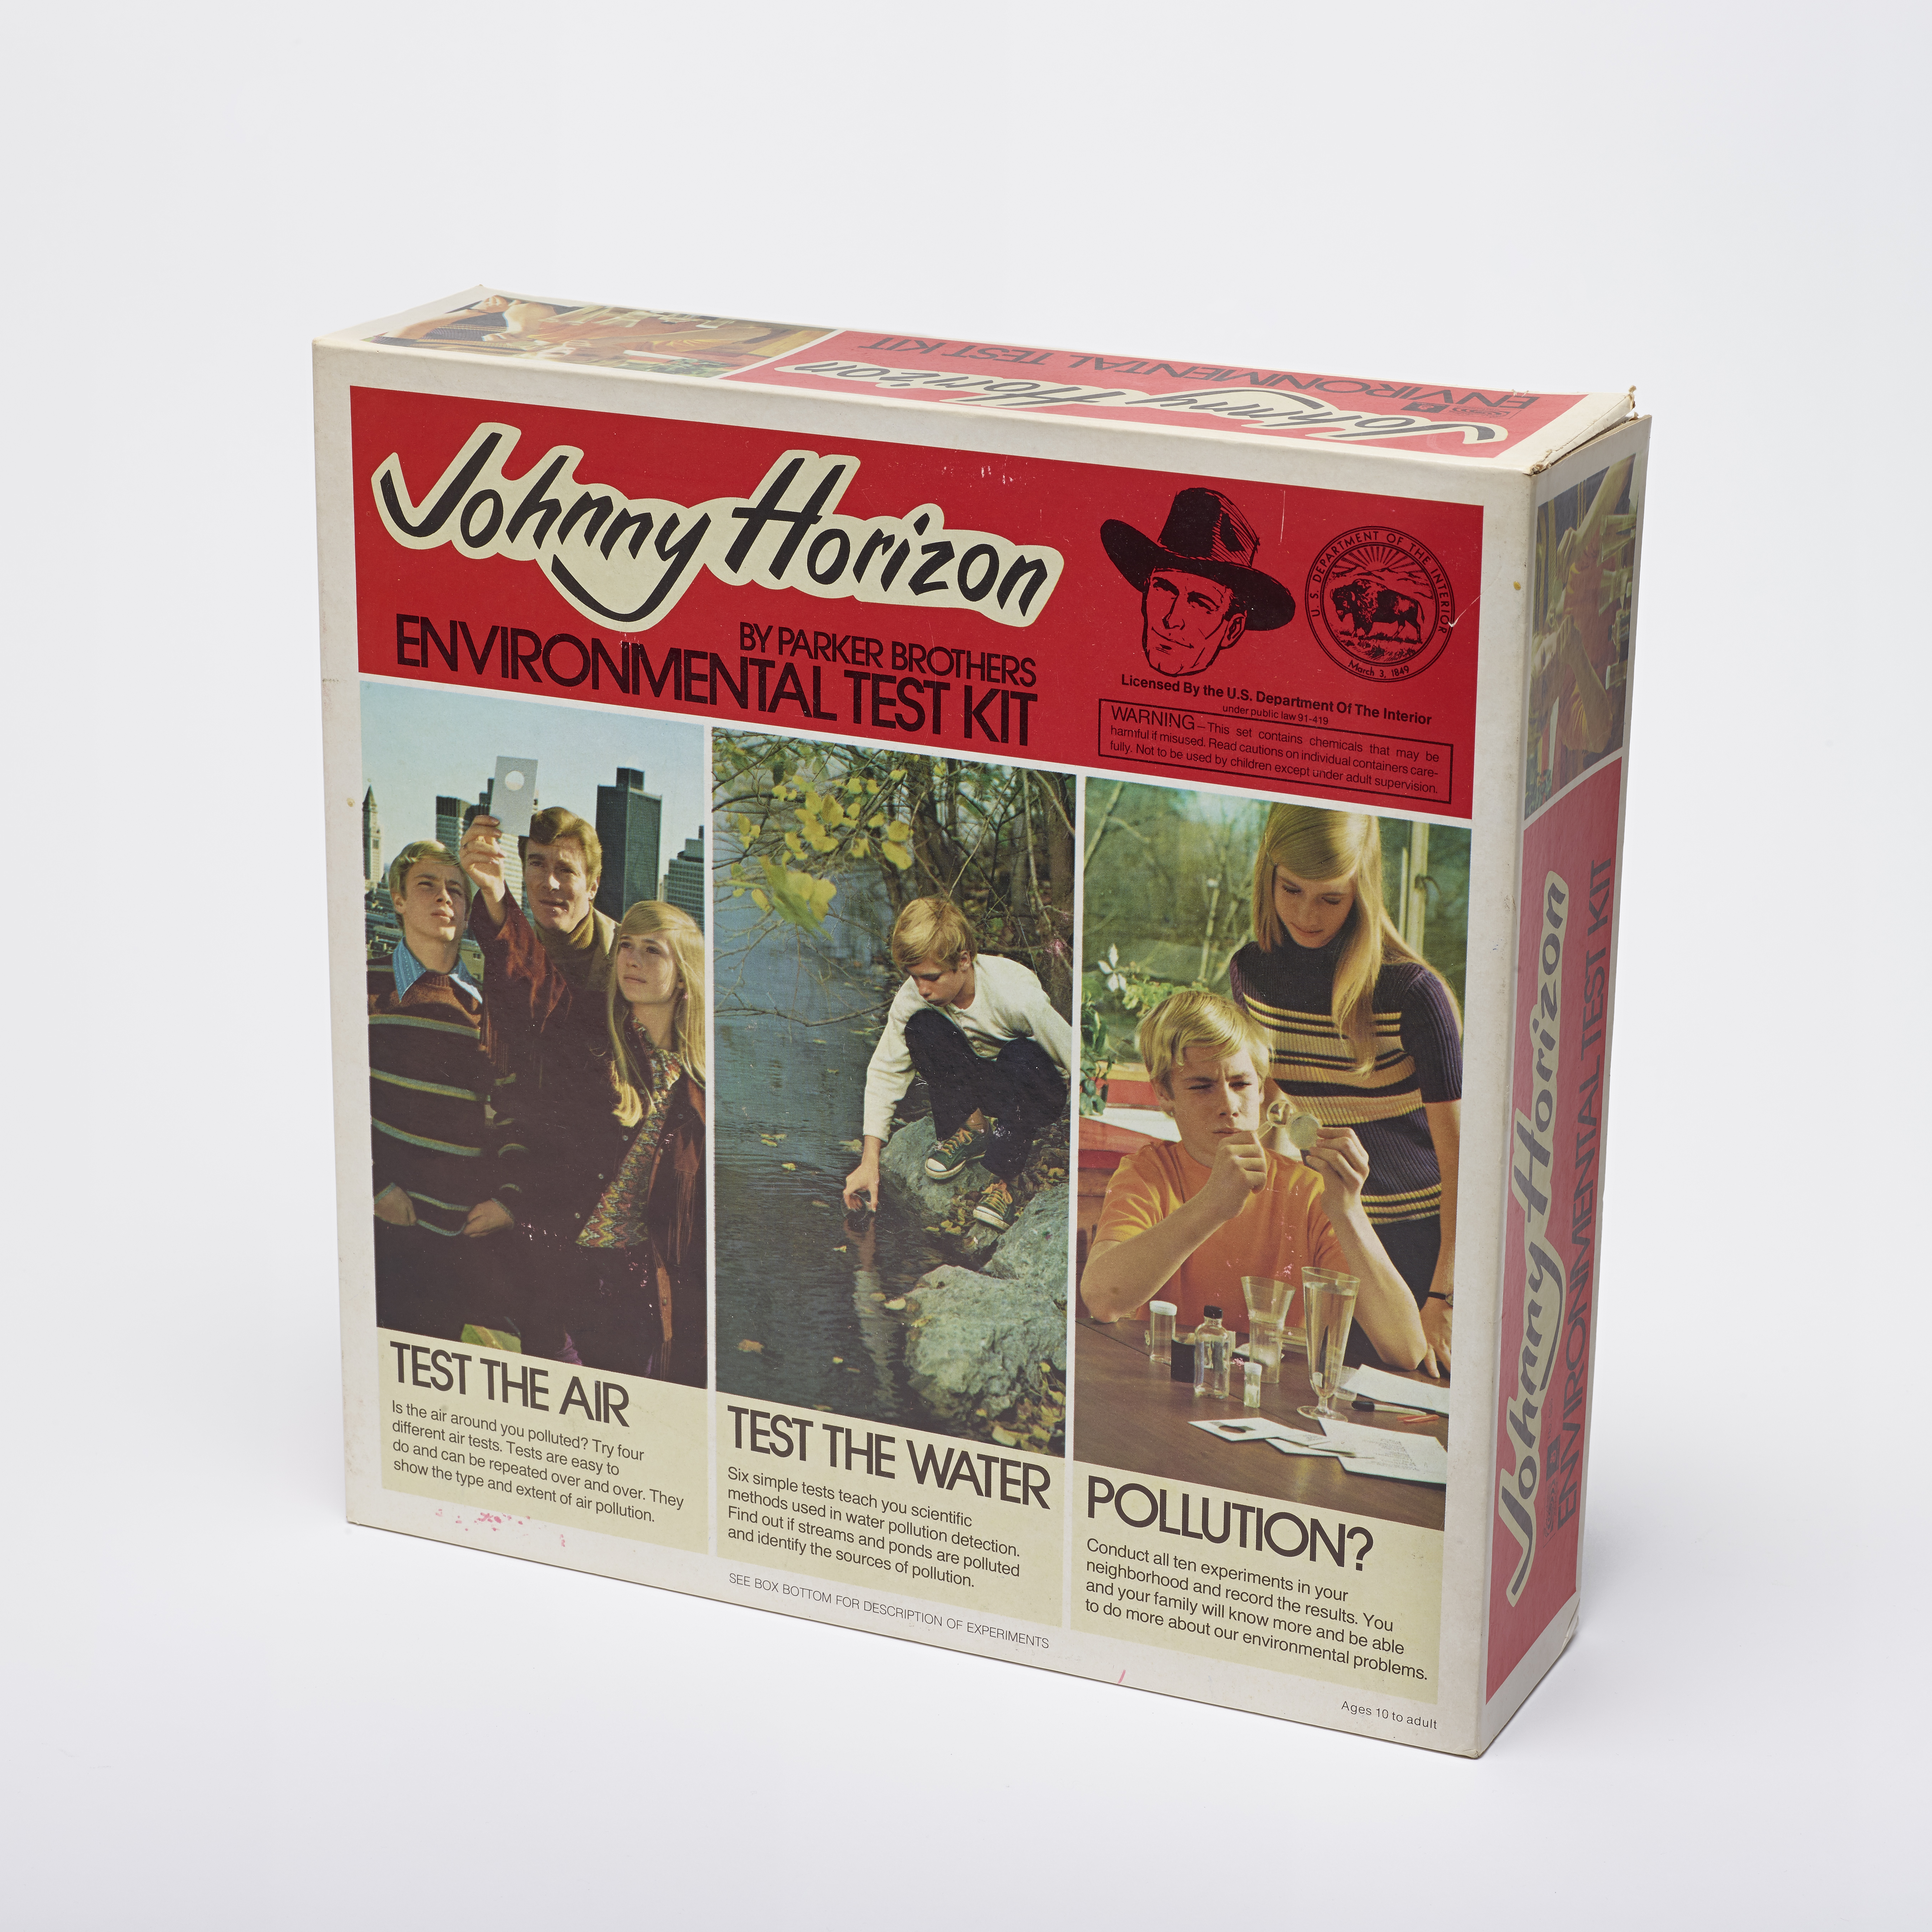 A faded box cover for a Johnny Horizon Environmental Test Kit. A red title bar gives the product’s name next to the face of a man in a cowboy hat. Three vertical images show children engaged in using the kit with the titles “Test the Air,” “Test the Water,” and “Pollution?”